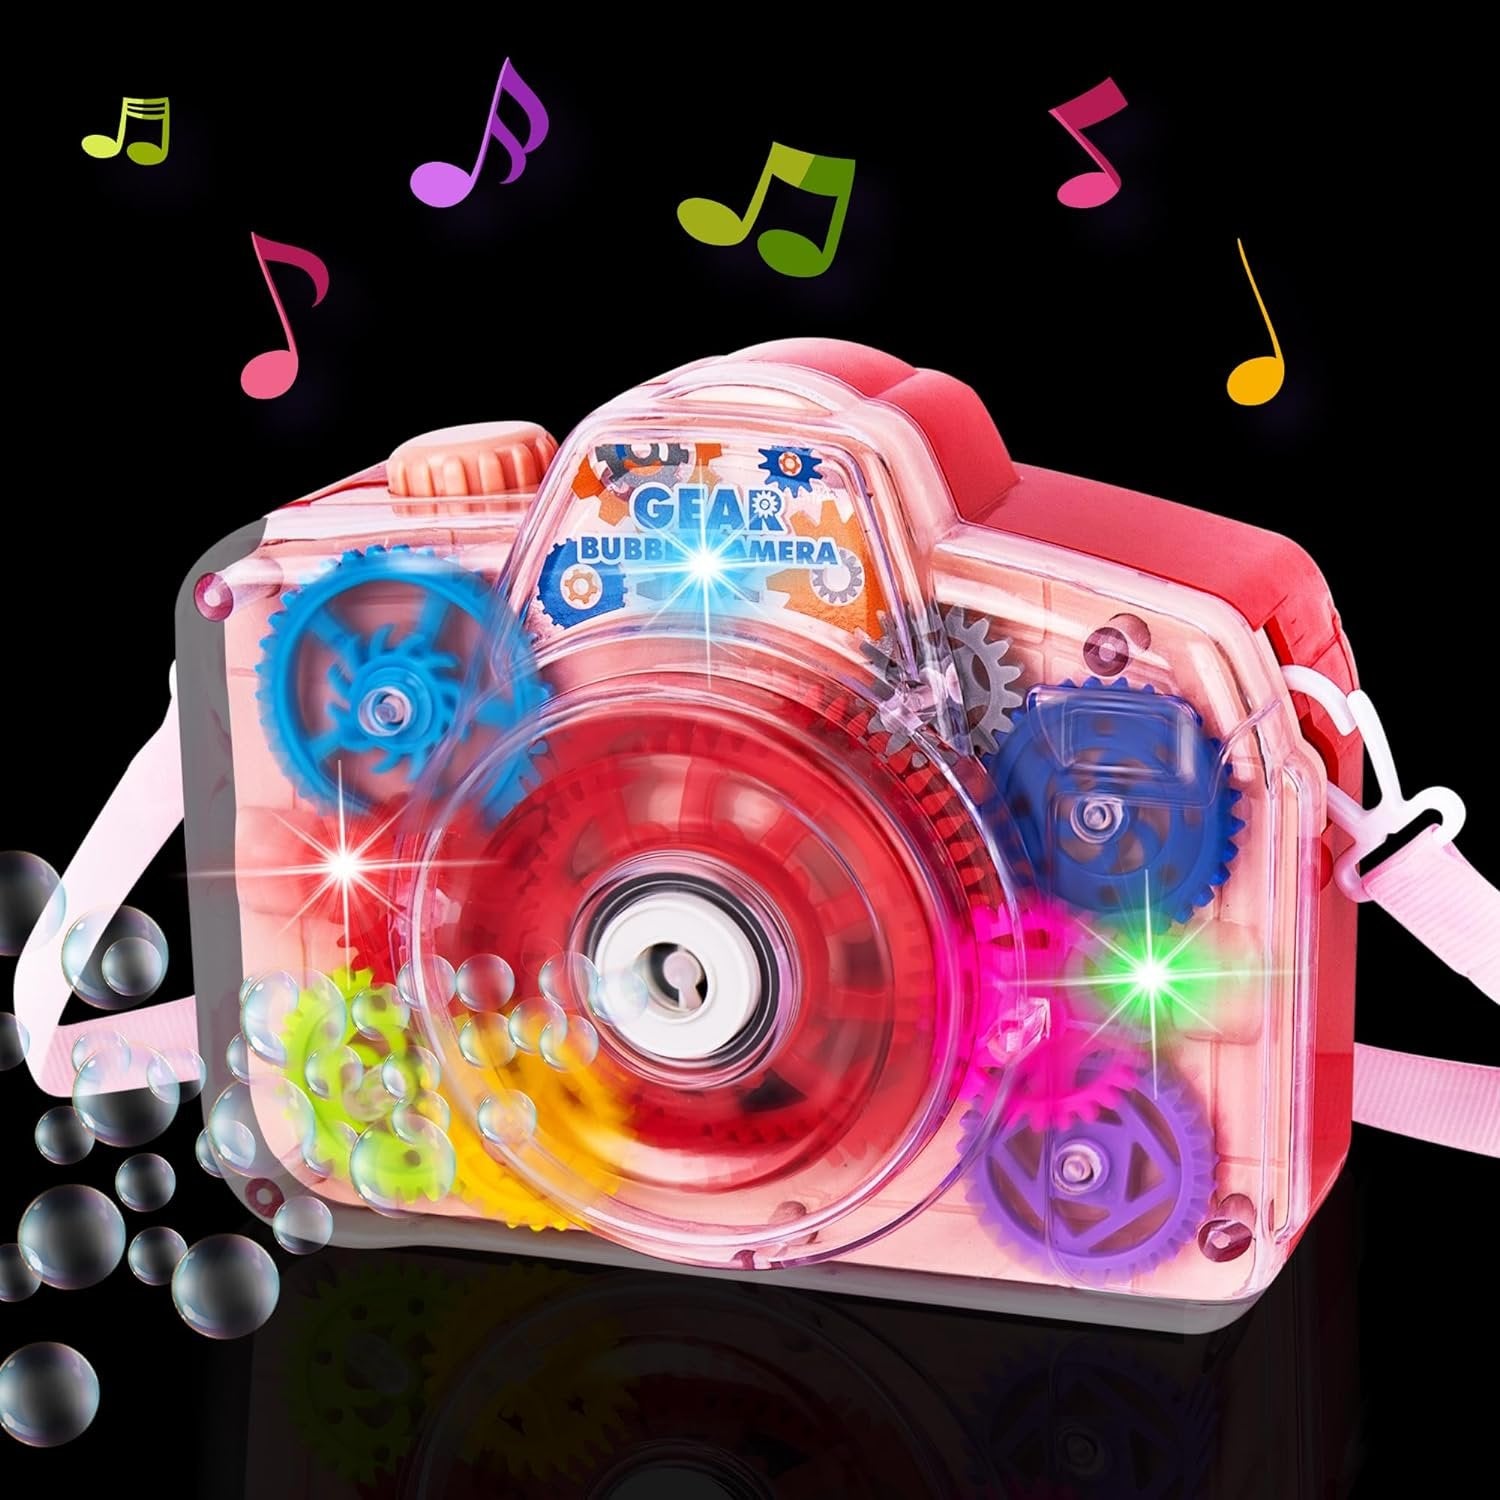 Bubble Camera Gear Toy, Toy Camera Bubble Machine with 9 Moving Gears, Neck, and Bubble Solution - Small Bubble Machine with Music and Lights for Extra Fun, Cute Bubble Makers for Kids